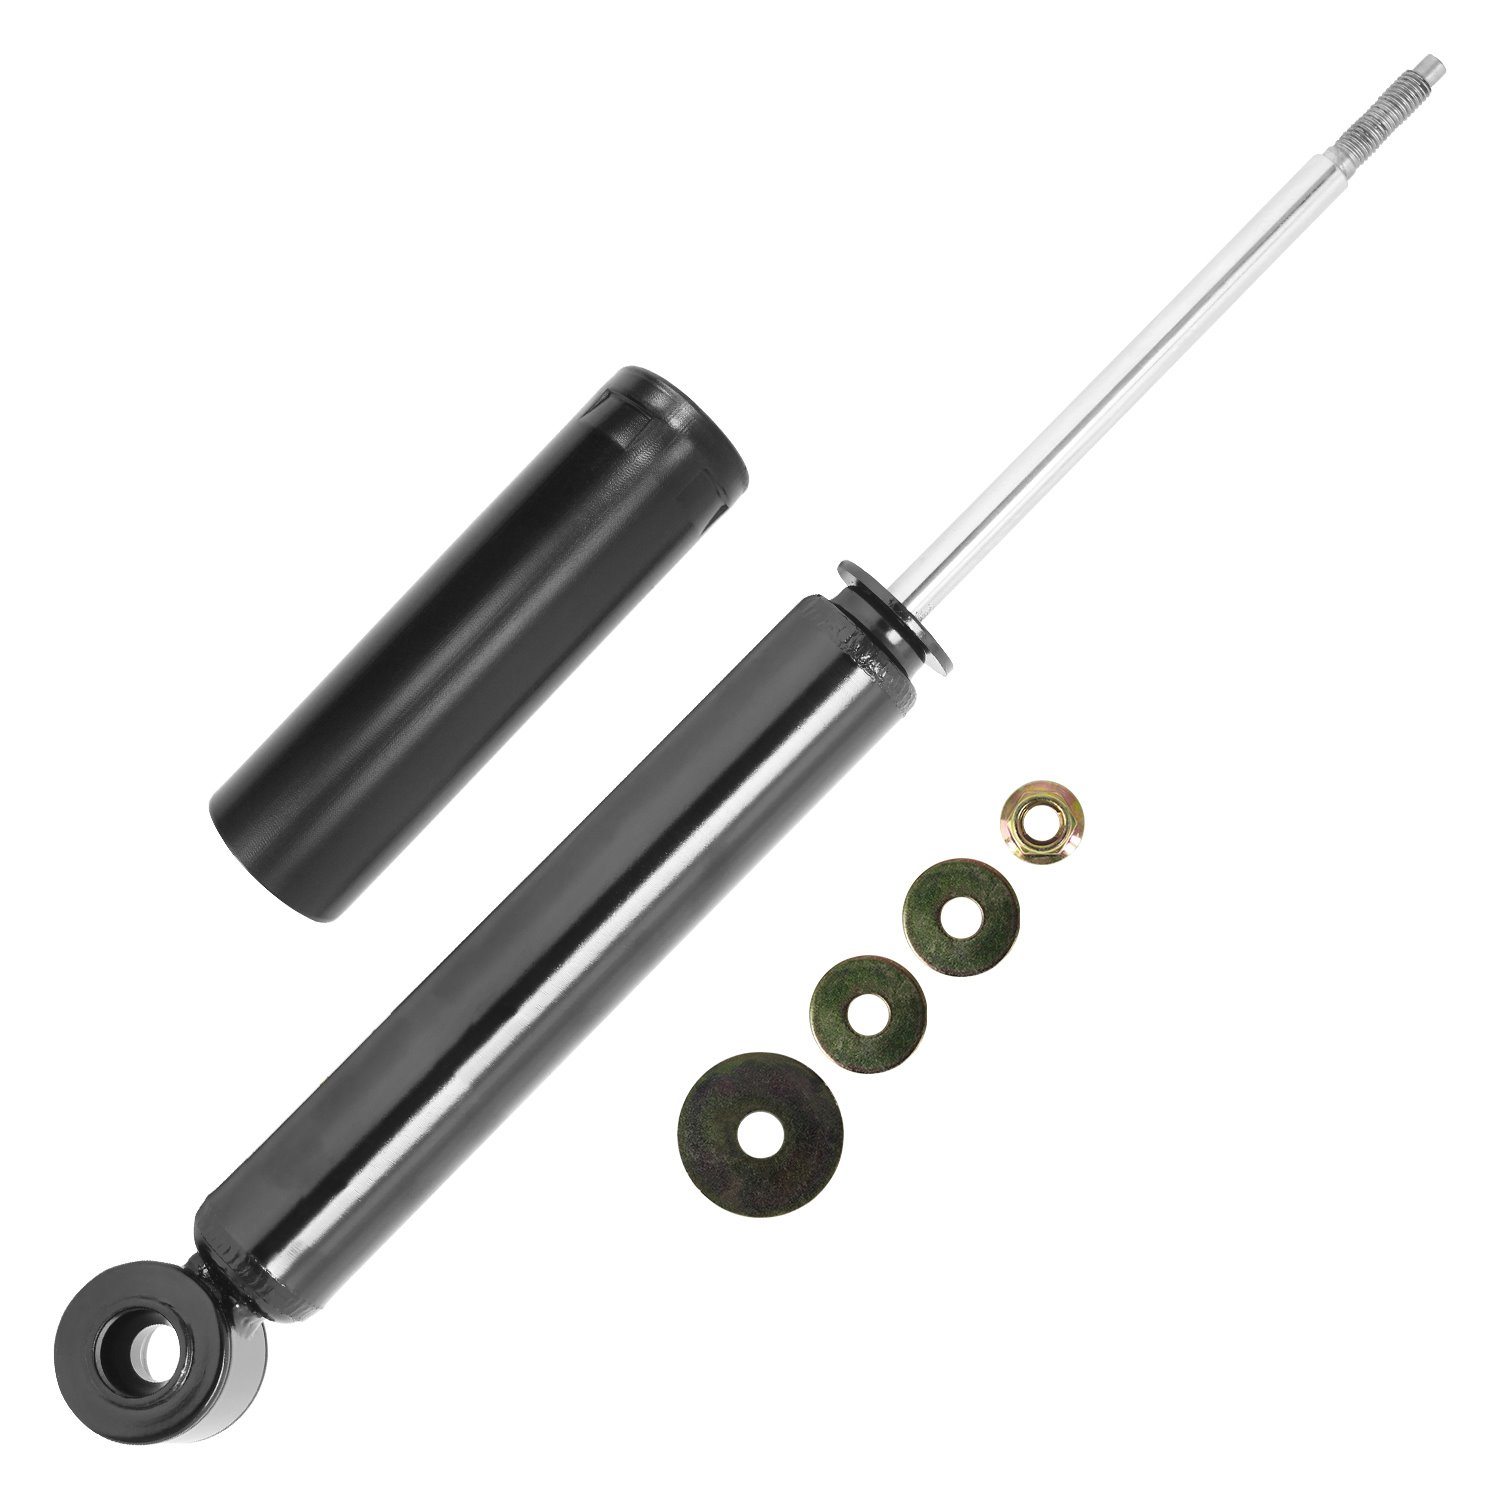 259320 Gas Charged Shock Absorber Fits Select Volvo 850, Volvo C70, Volvo S70, Volvo V70